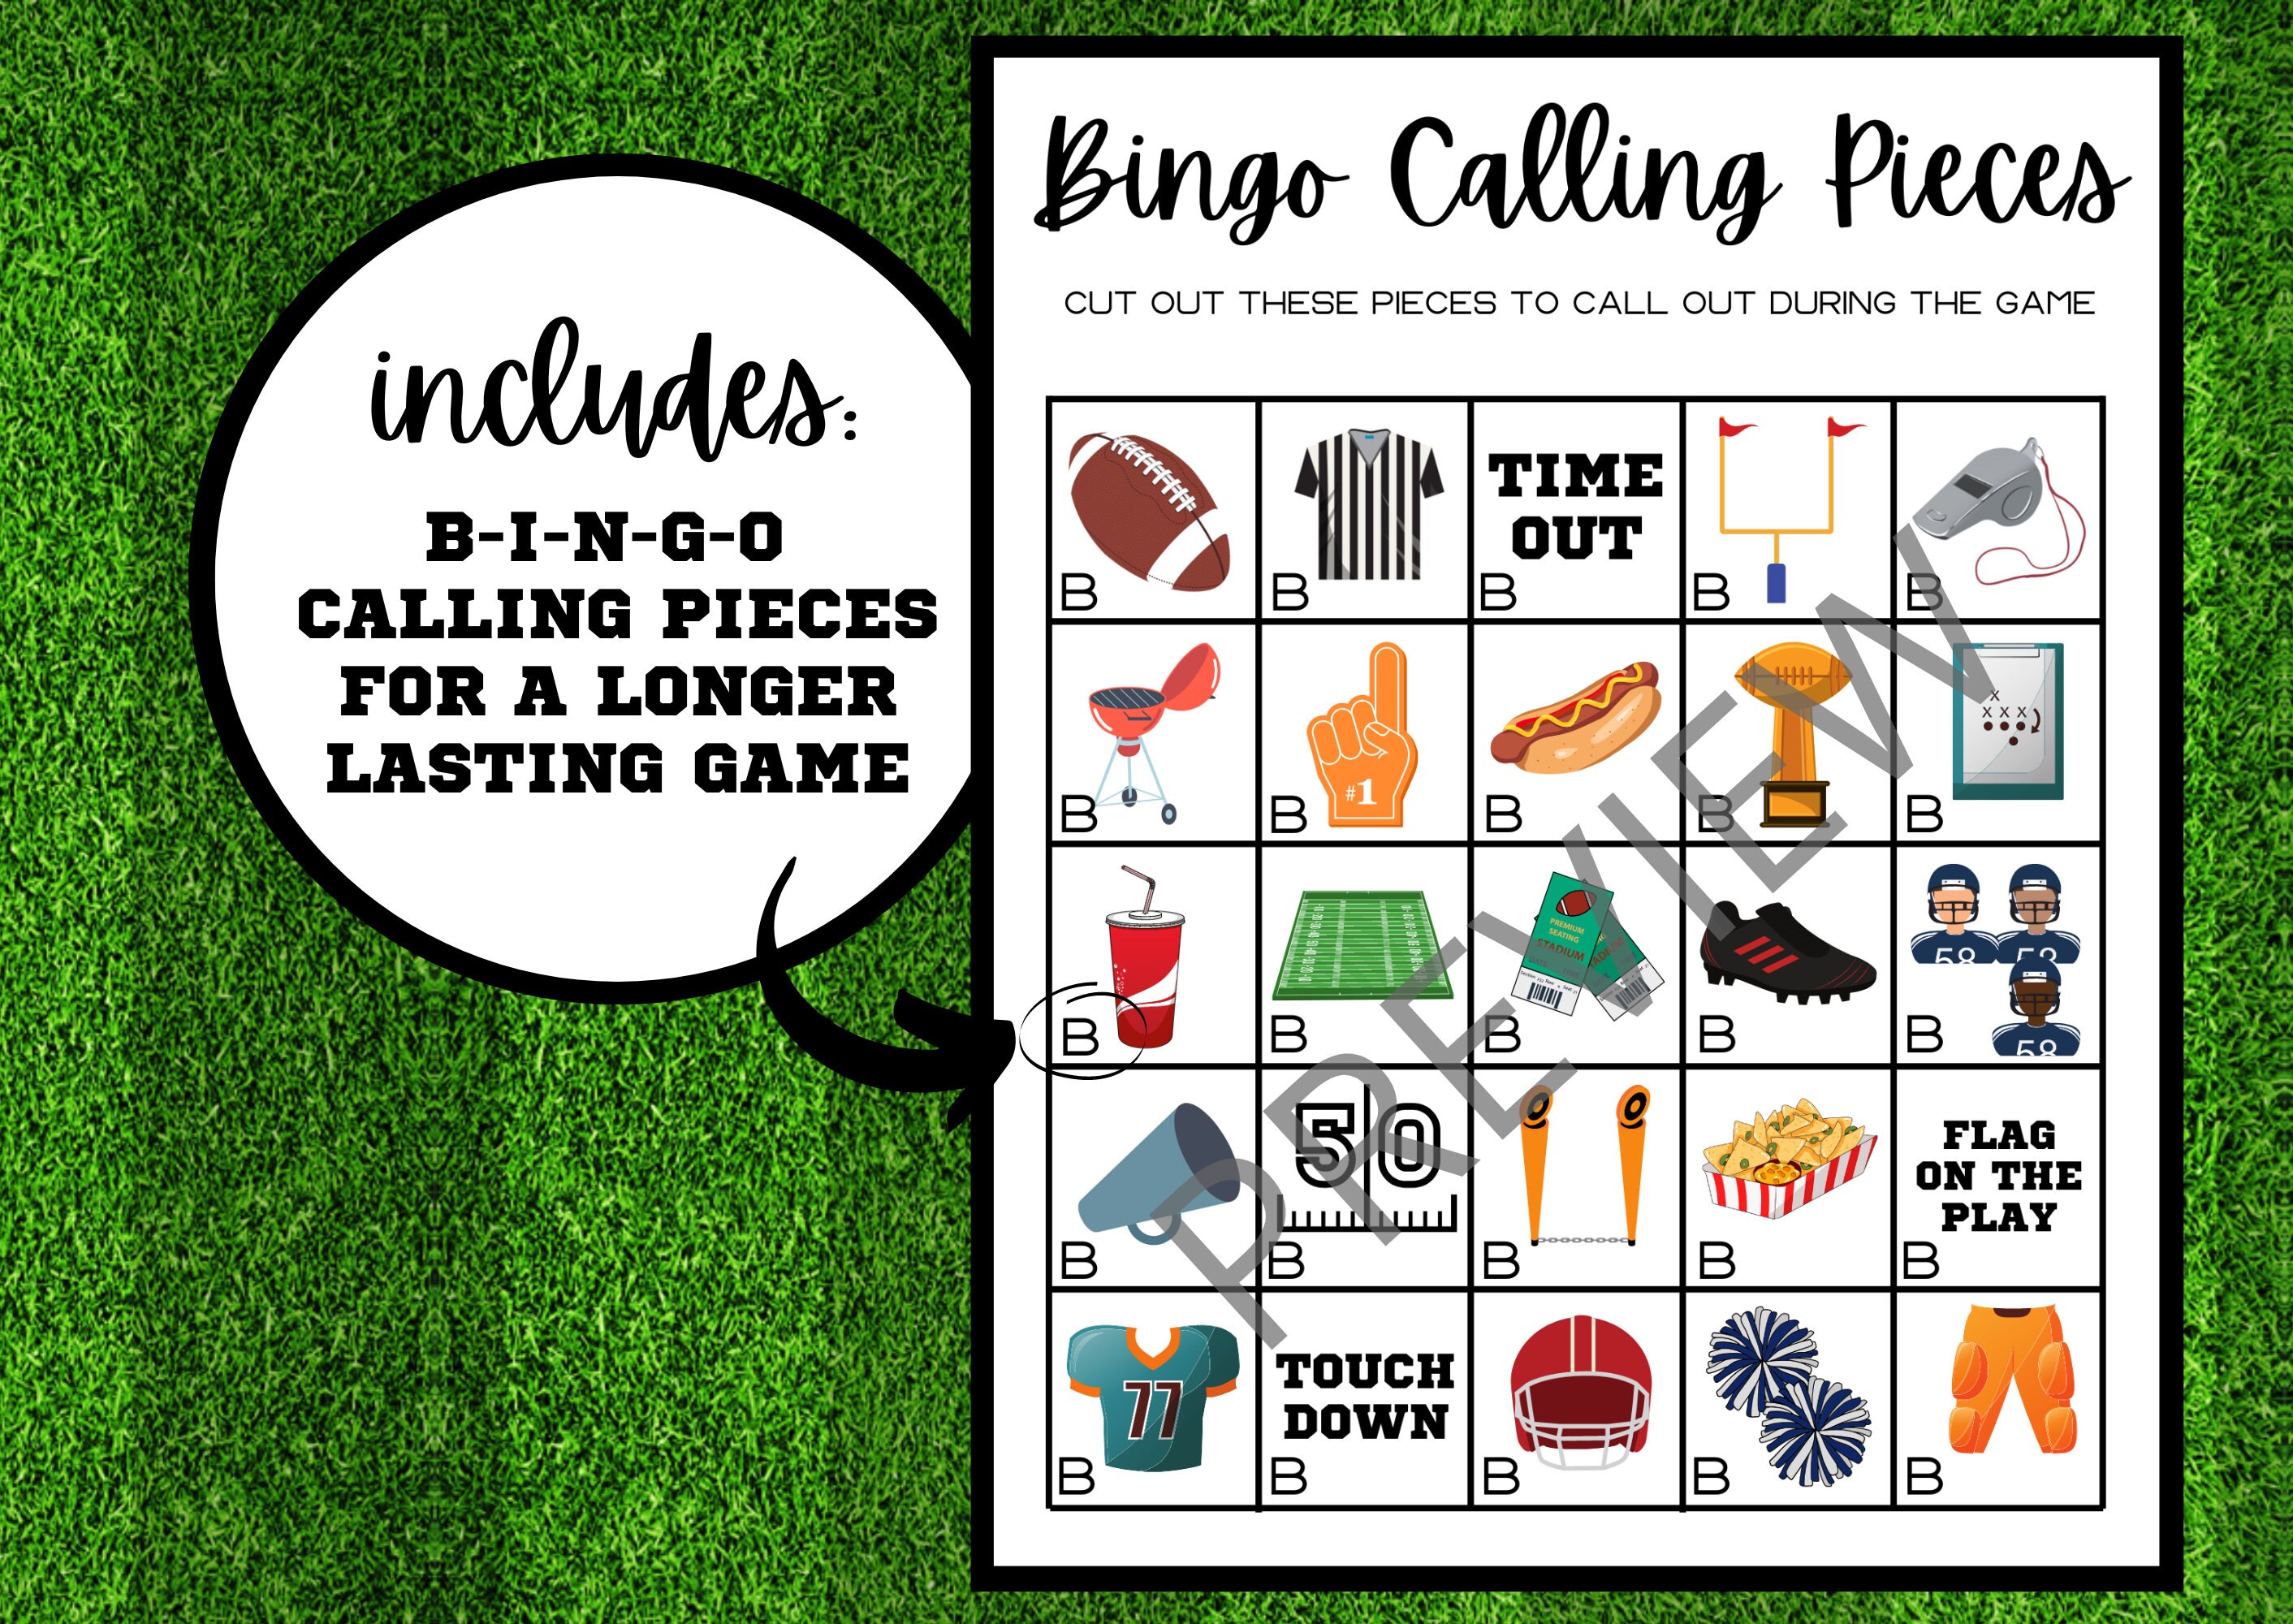 Tonight! Cozy up with us for some football bingo in the taproom at